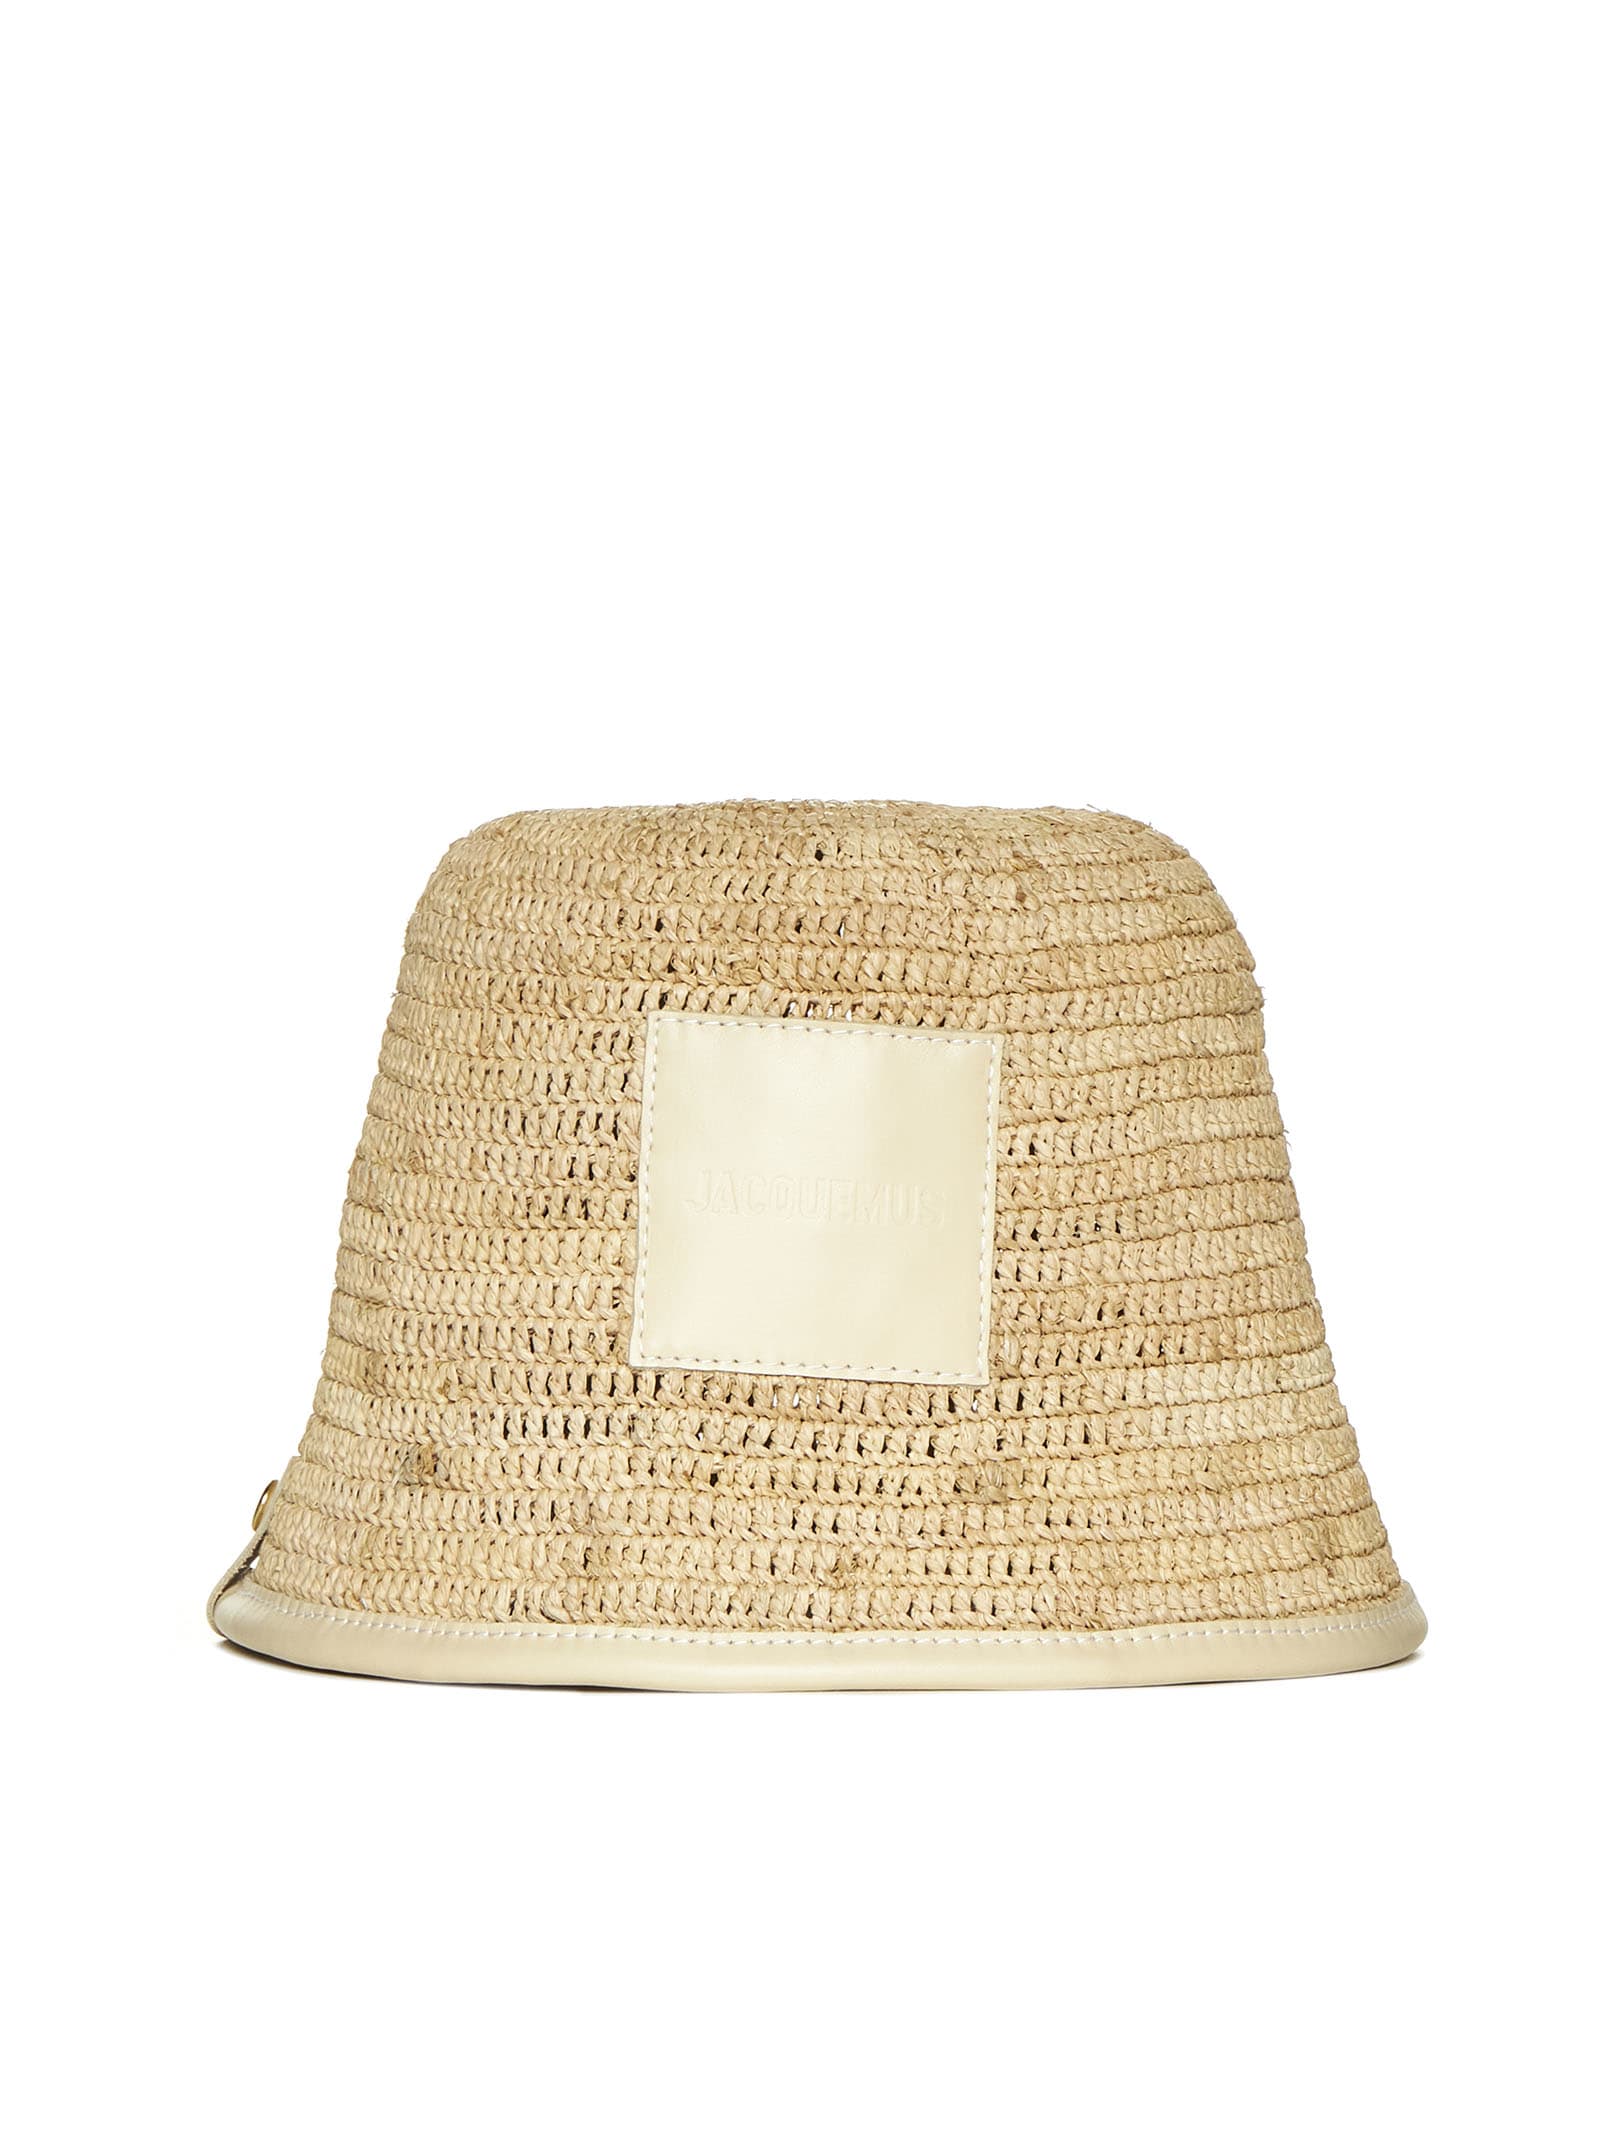 Jacquemus Hat In Brown